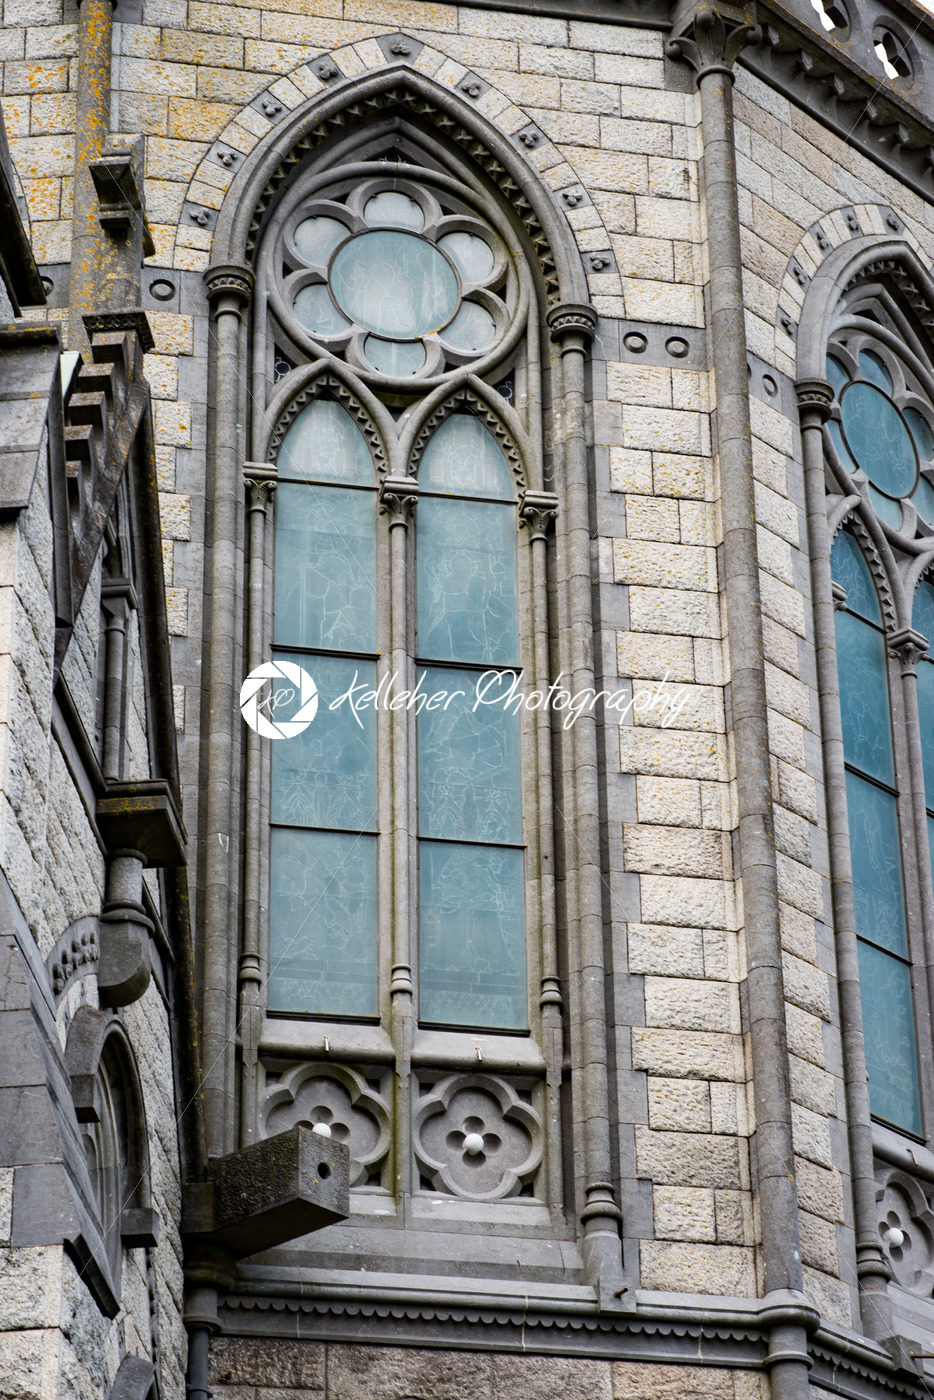 COBH, IRELAND – AUGUST 19, 2017: St. Colman’s neo-Gothic cathedral, Cobh, South Ireland - Kelleher Photography Store